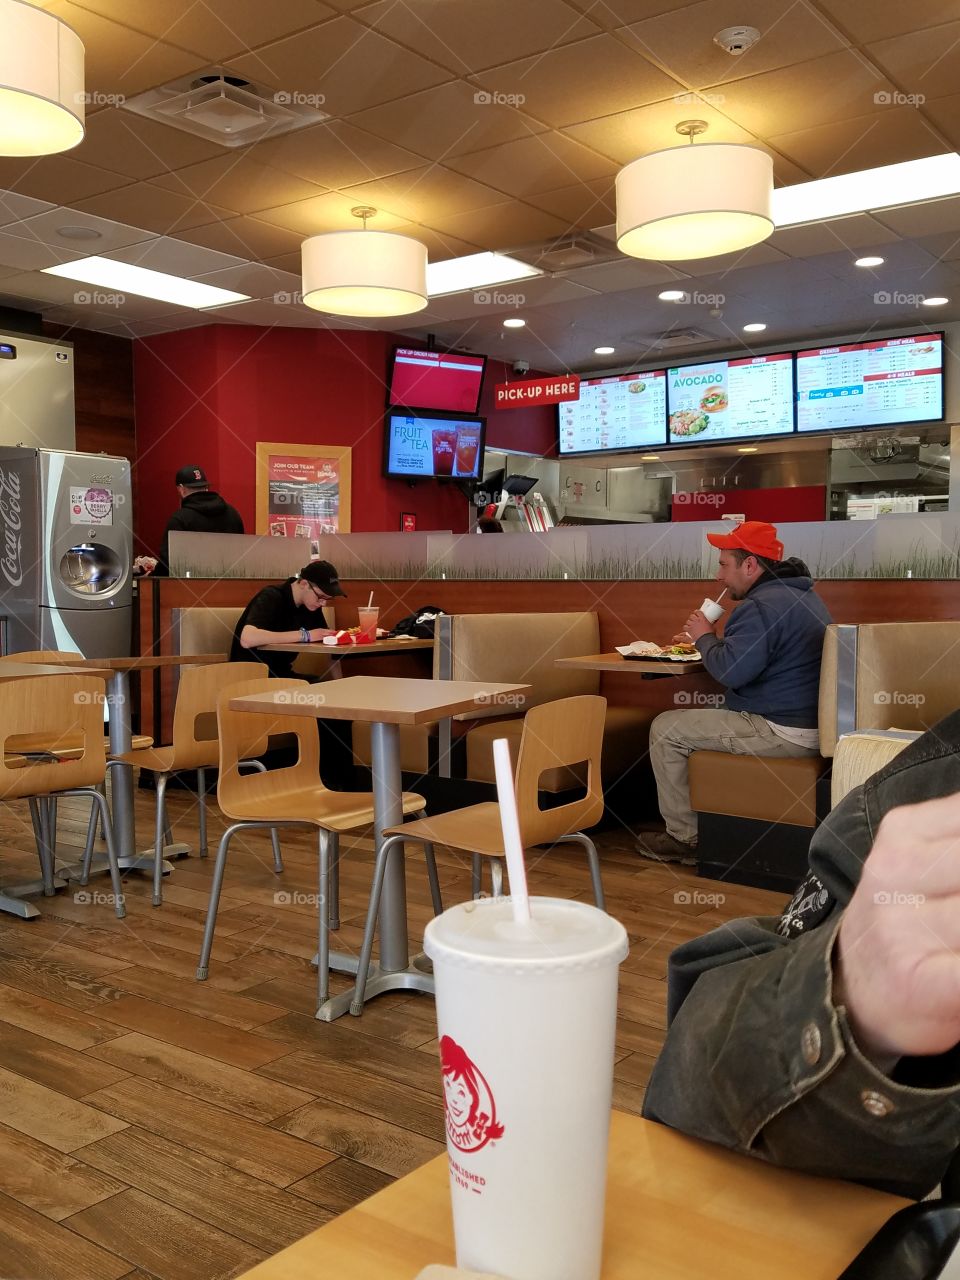 Inside a fast food restaurant, people eating, booths & tables with get your own drinks area.